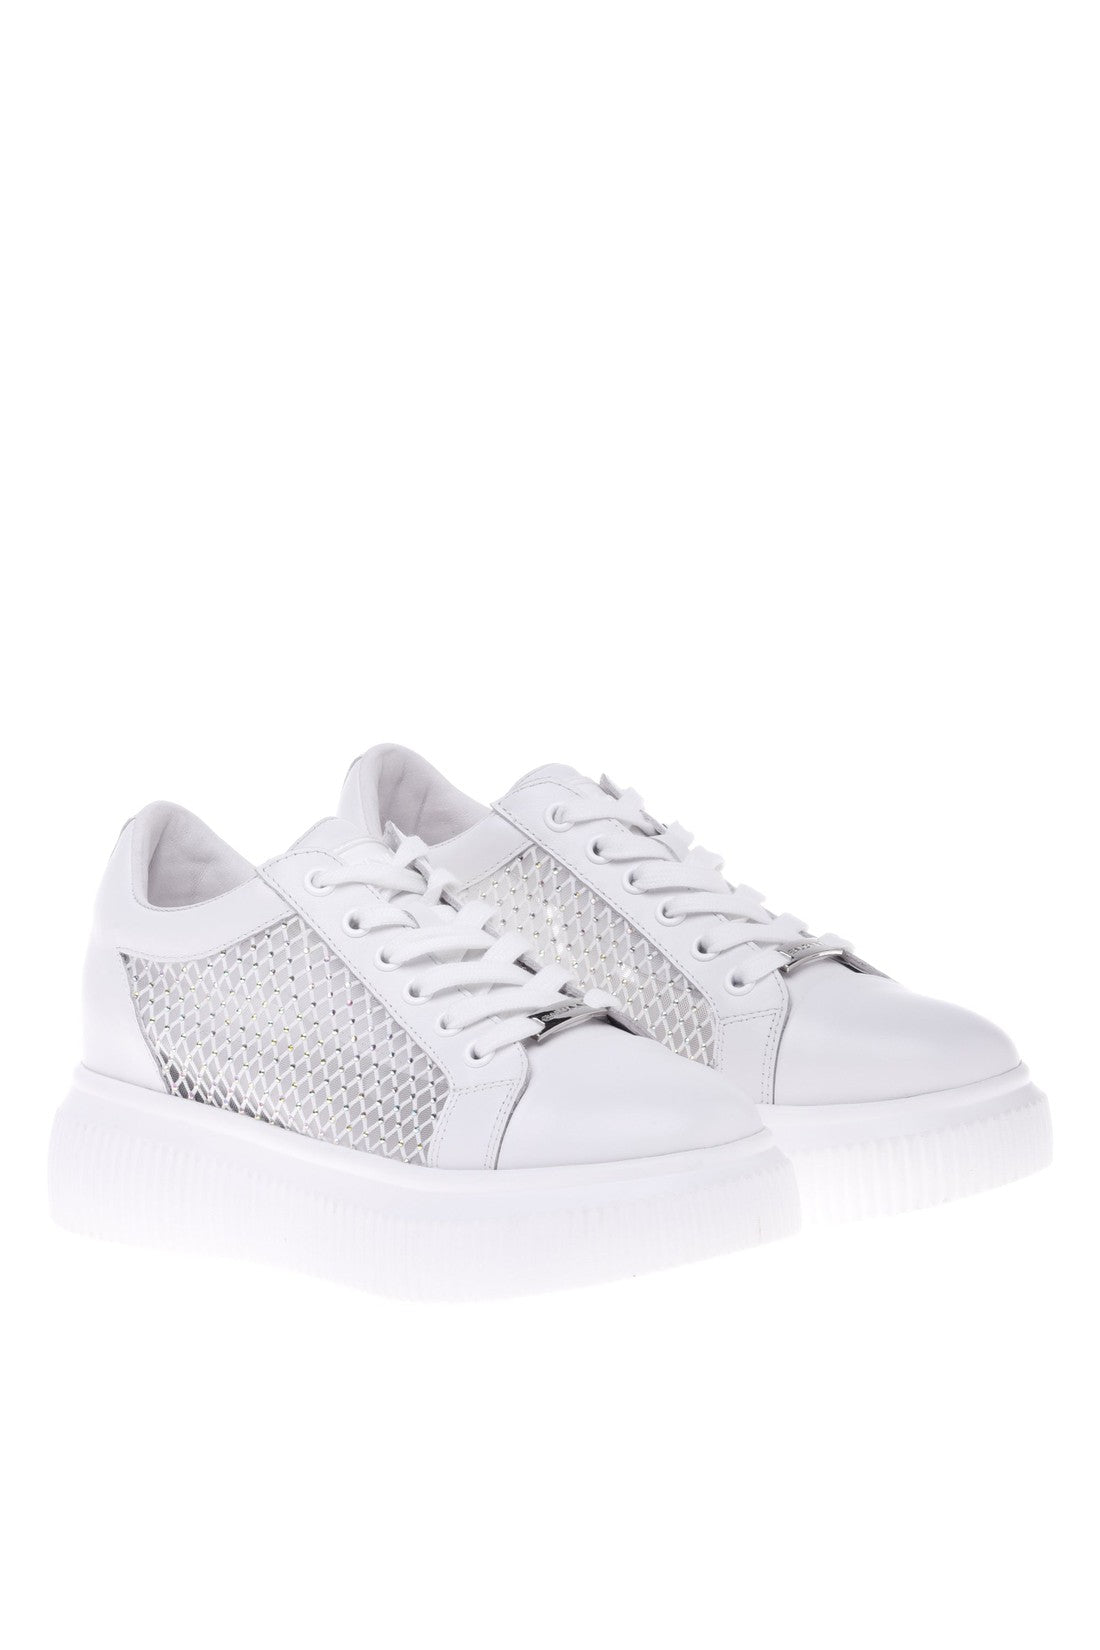 BALDININI-OUTLET-SALE-Sneaker-in-white-calfskin-with-mesh-Sneaker-ARCHIVE-COLLECTION-3.jpg